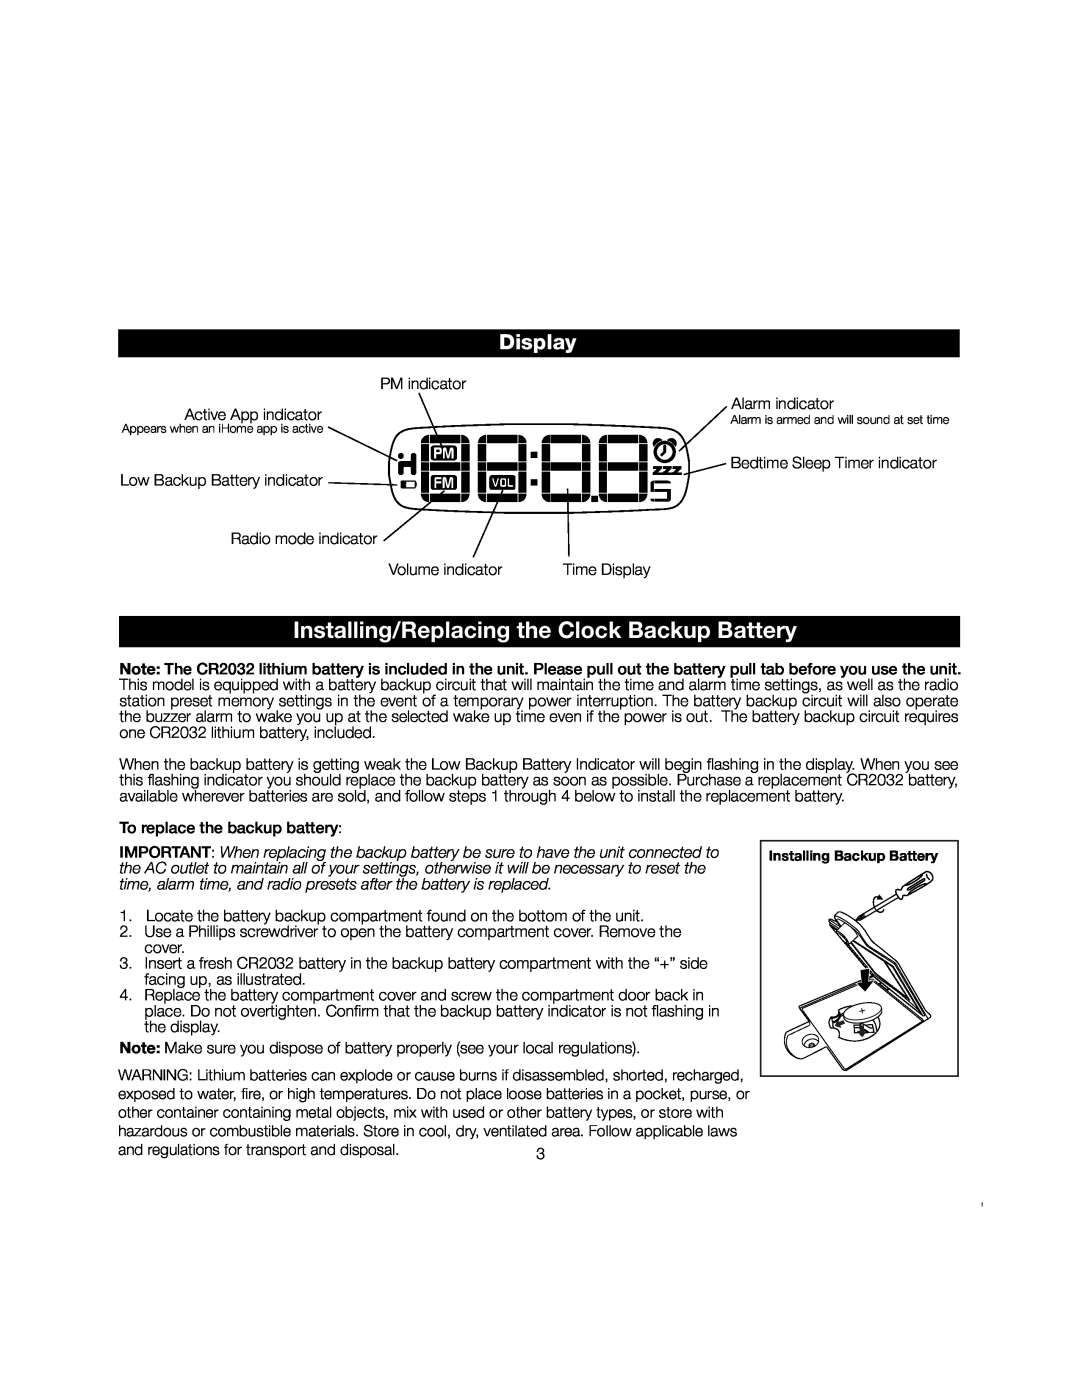 iHome iA17 instruction manual Display, Installing/Replacing the Clock Backup Battery 